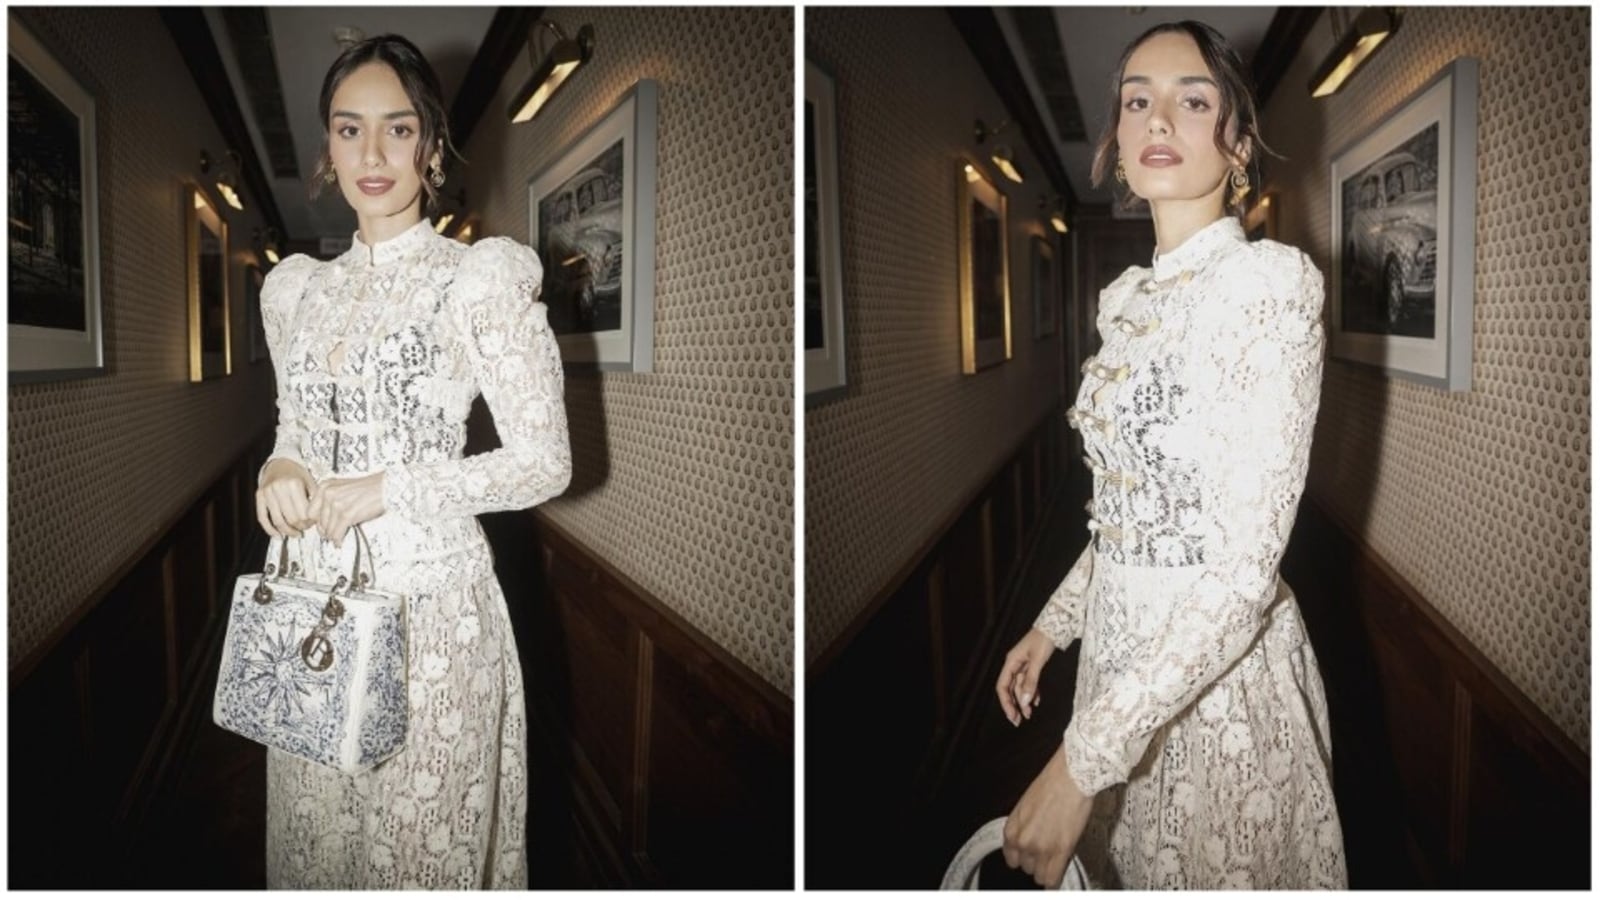 Manushi Chhillar Attends Christian Dior's First India Event - SEE PICS